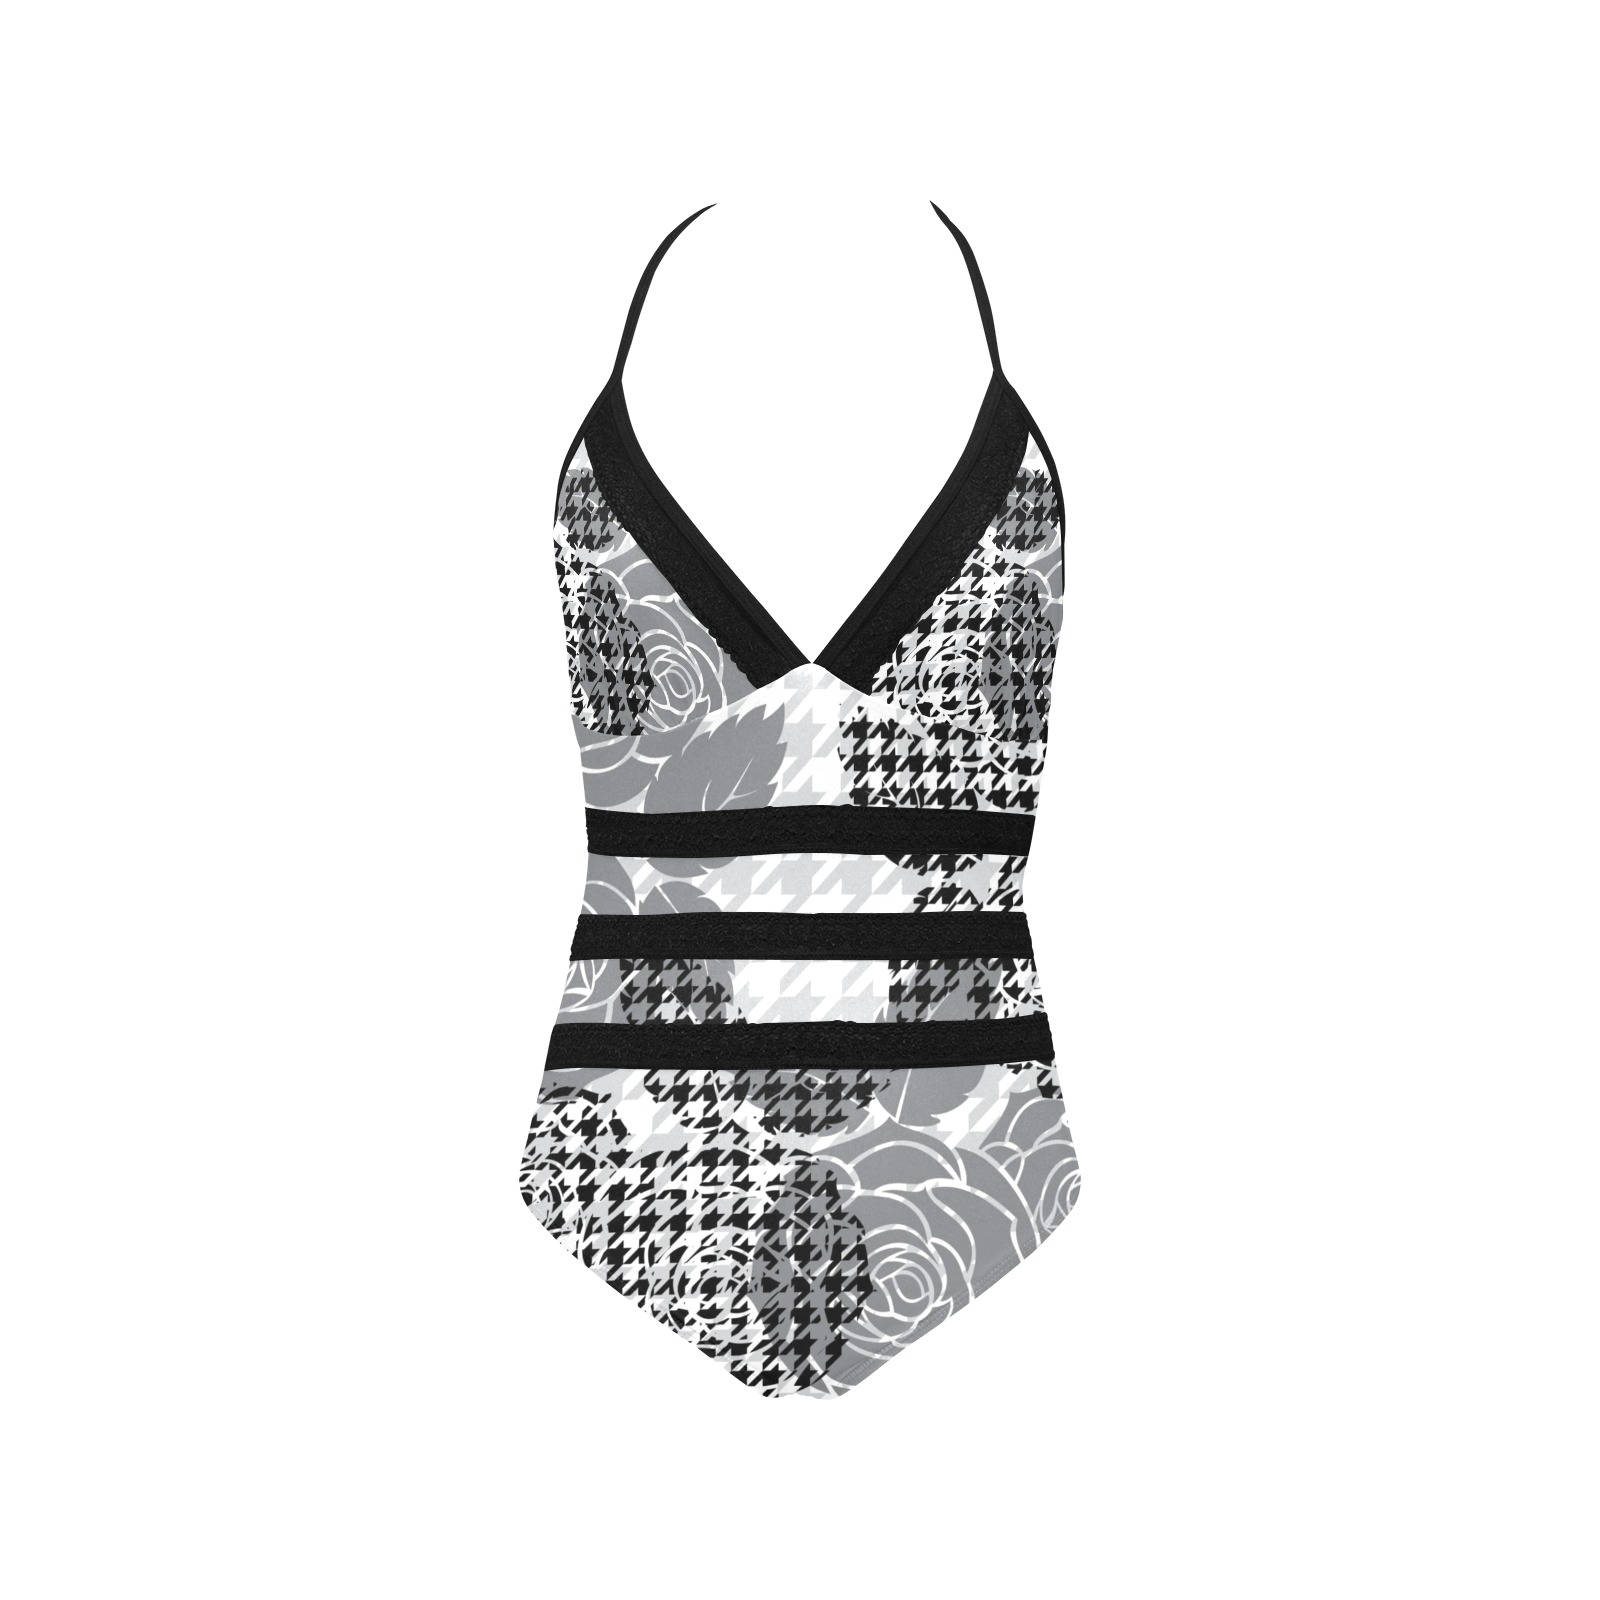 Hounds-tooth with roses Lace Band Embossing Swimsuit (Model S15)